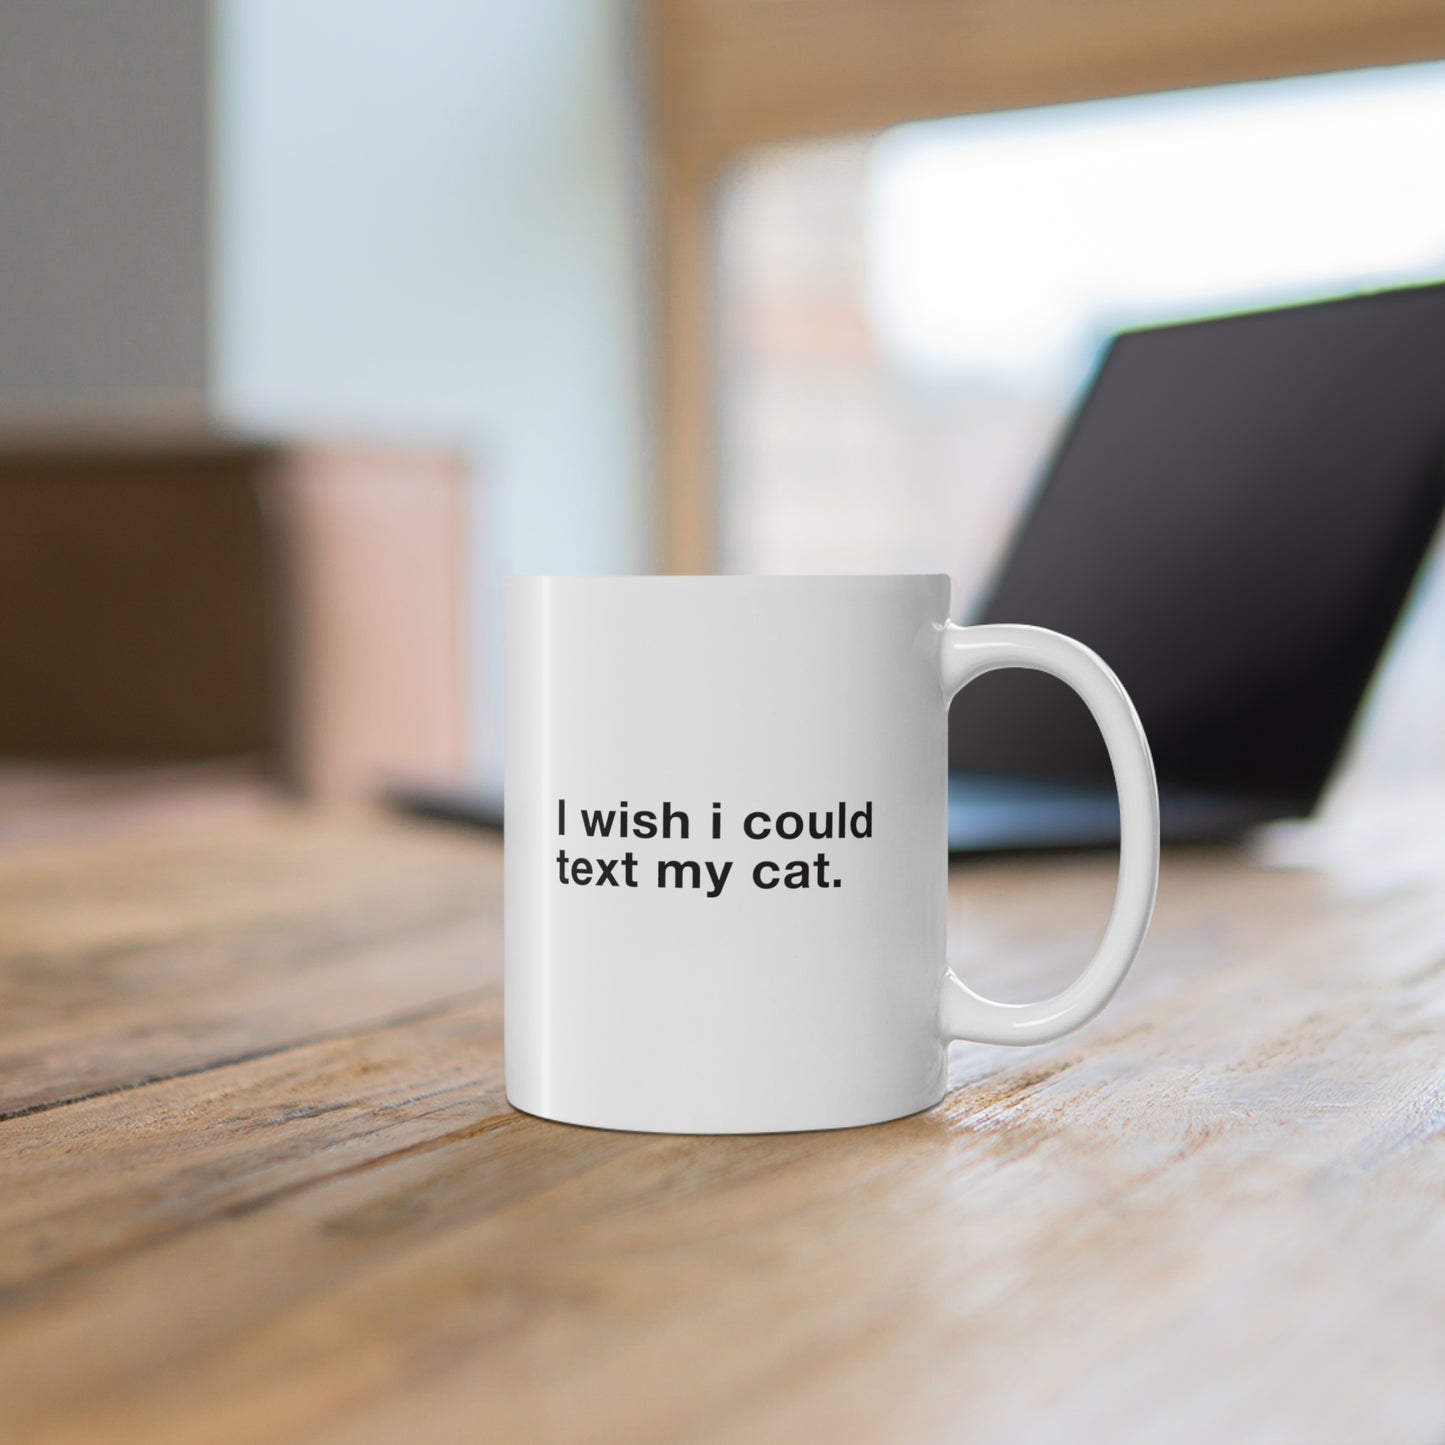 11oz ceramic mug with quote I wish i could text my cat